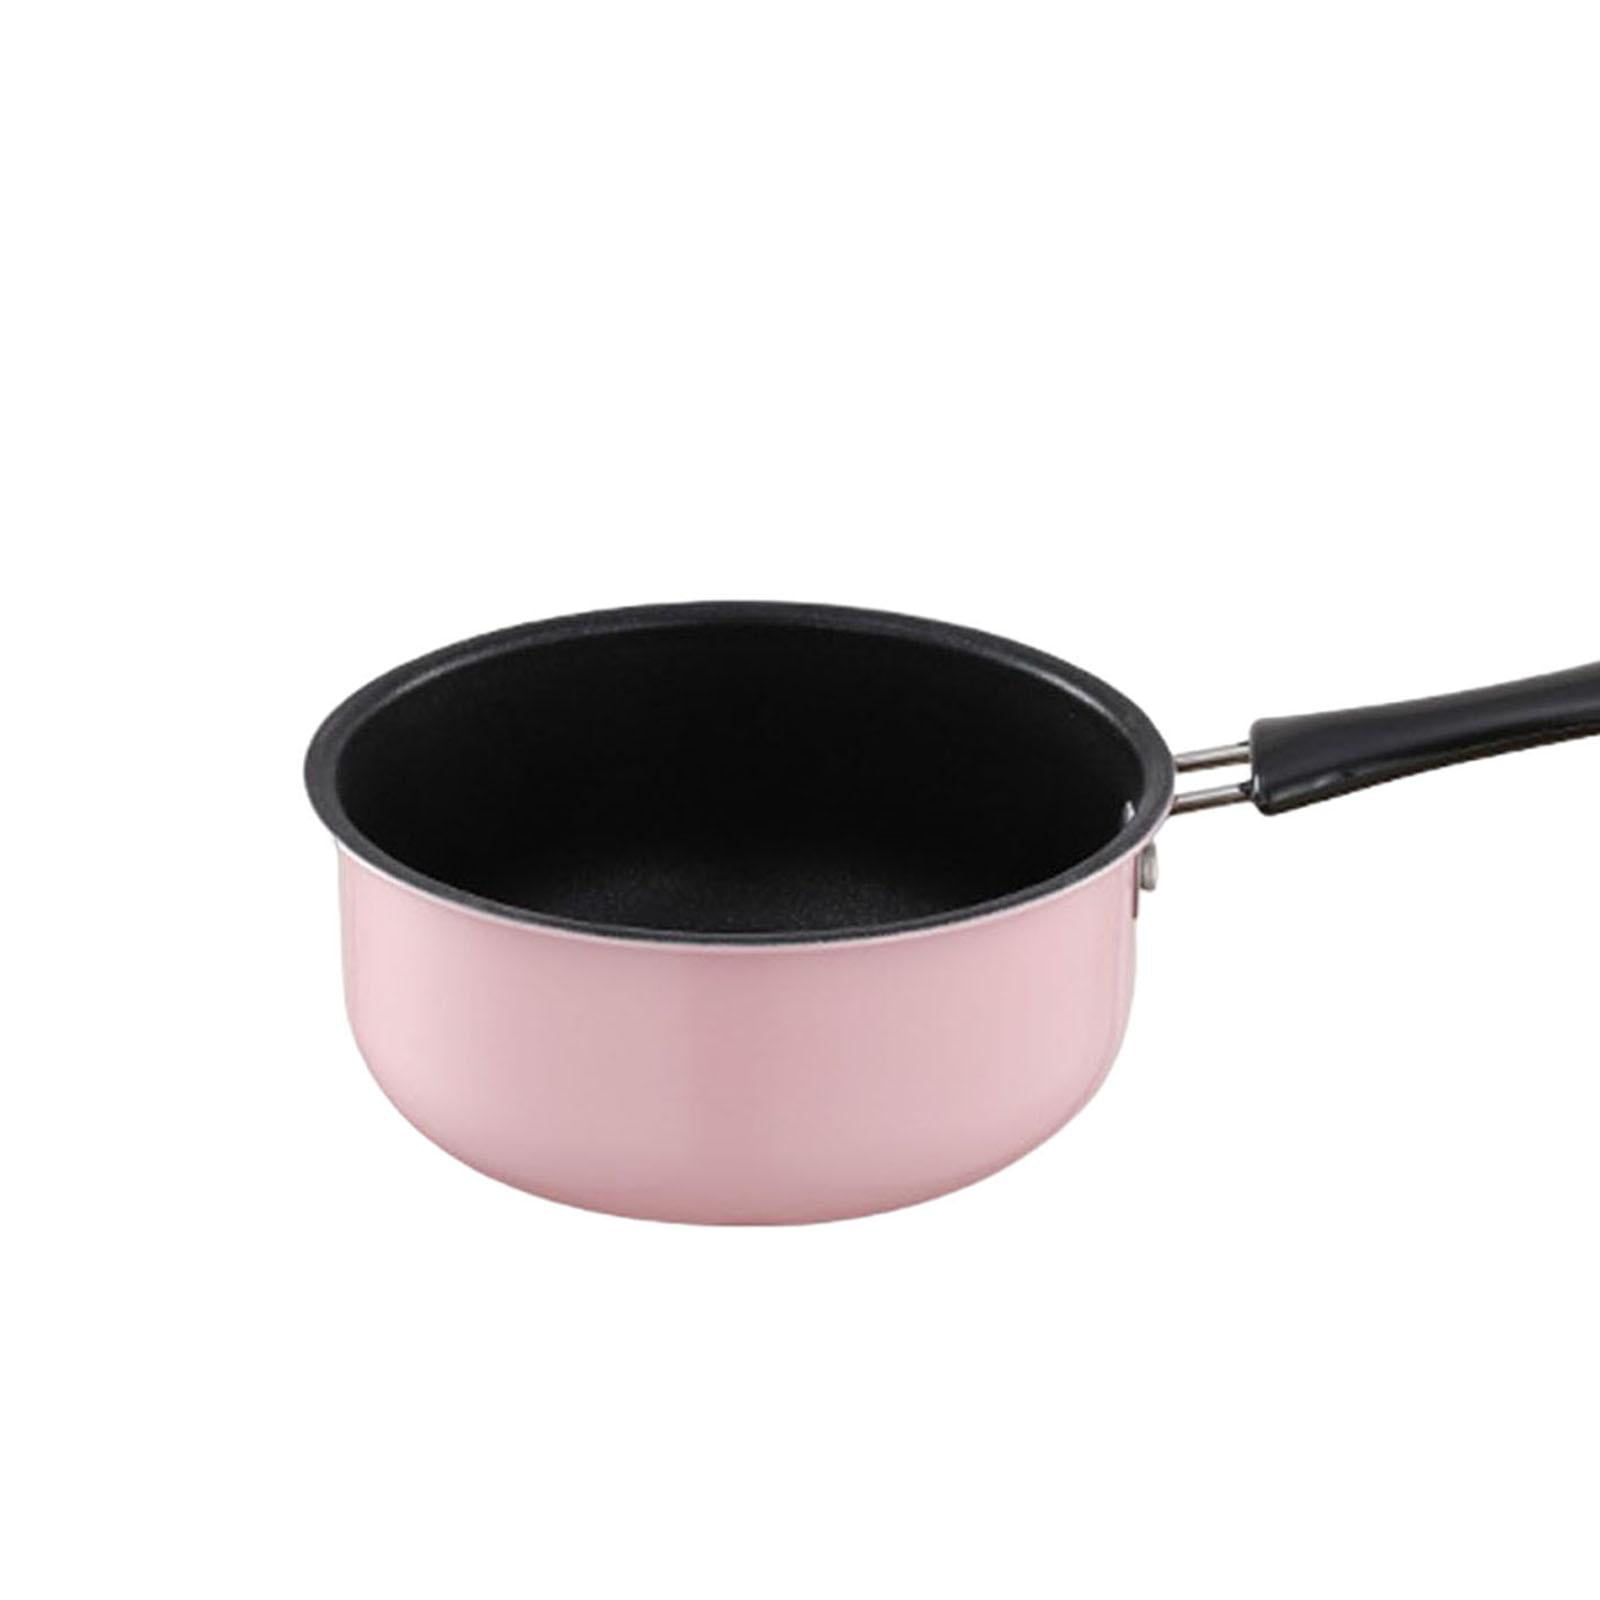  Saucepan, Stainless Steel Milk Pan 12cm, Soup Pot for Induction  and Oven, Non Stick Milk Pot, Dishwasher Safe Cookware(Sliver): Home &  Kitchen